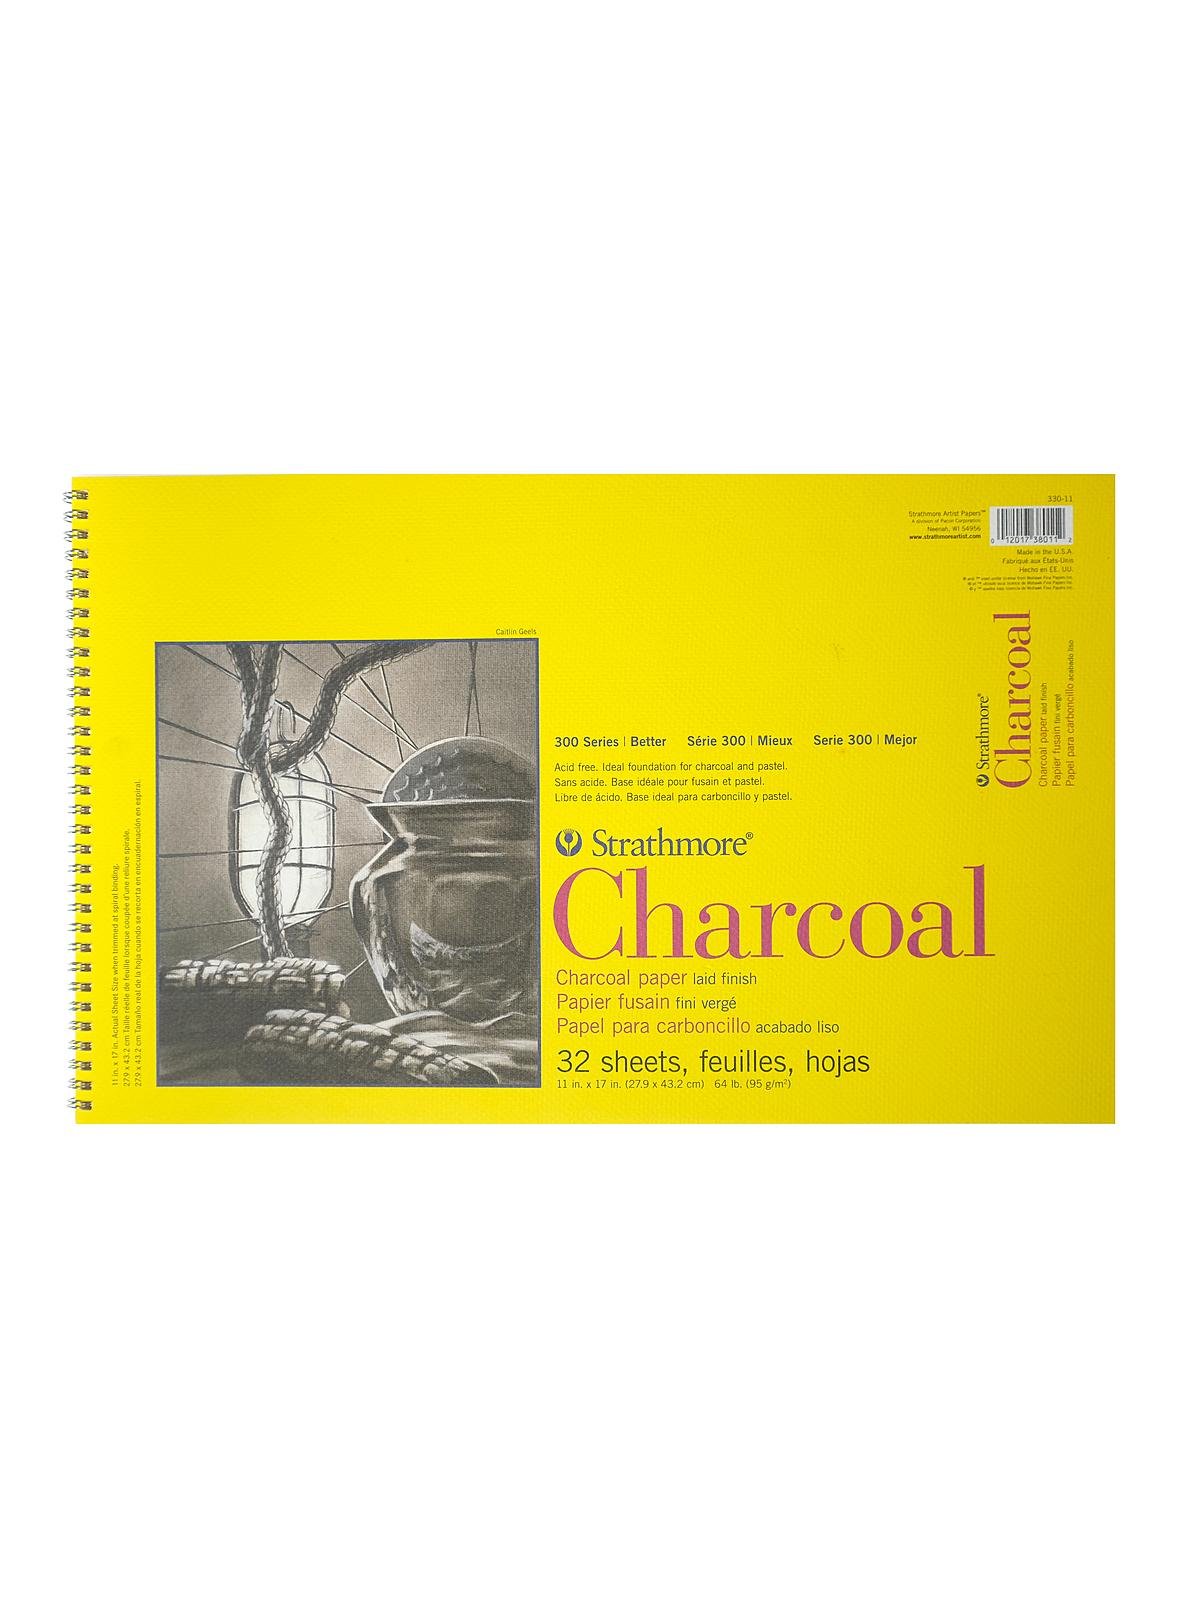 Strathmore Charcoal Paper 300 Series 11 x 17 32 Sheet Pad